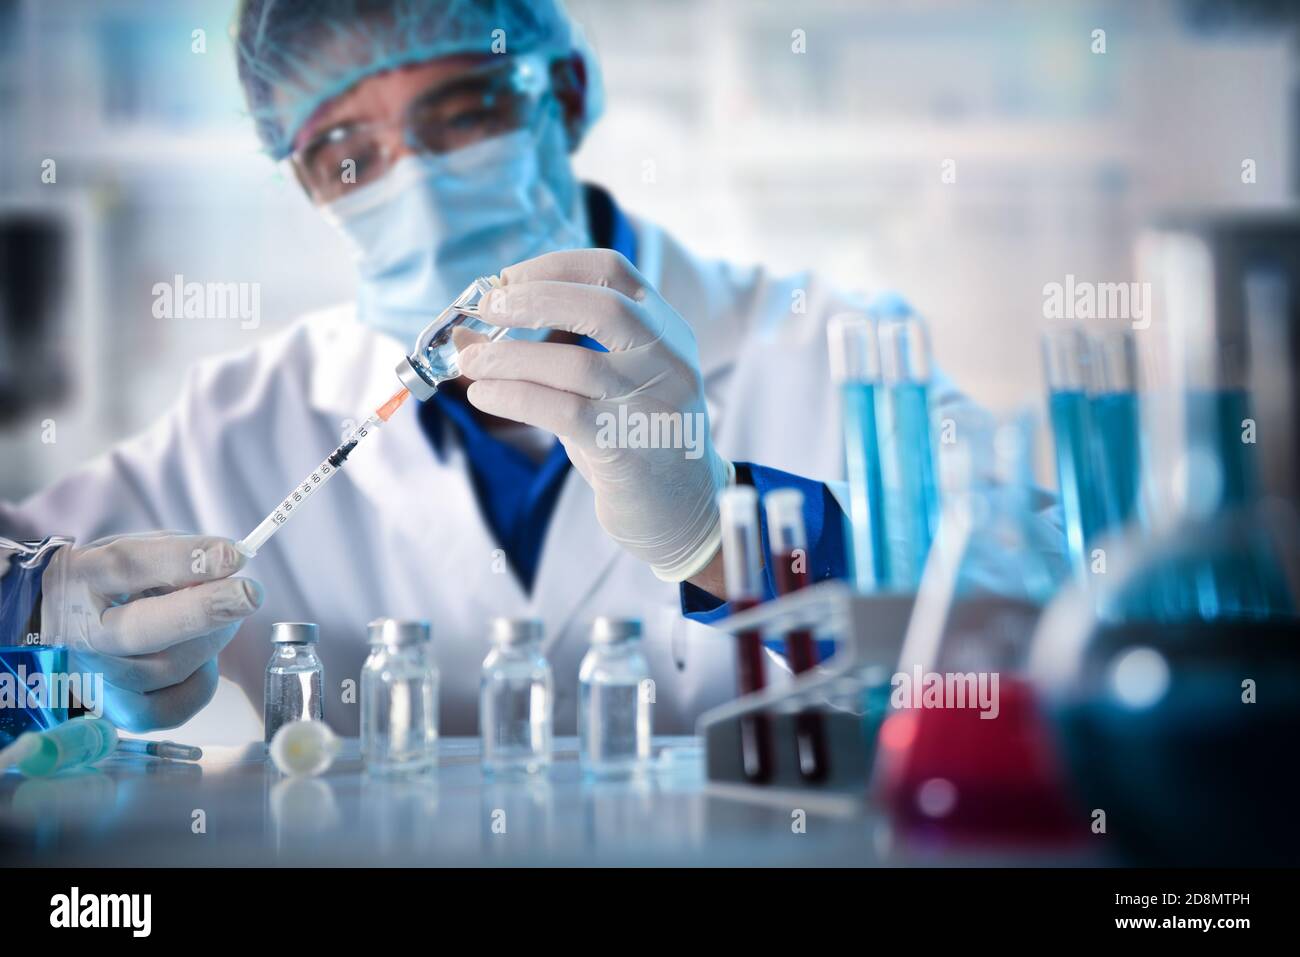 Virologist filling a syringe researching vaccine in laboratory bench. Horizontal composition. Front view. Stock Photo